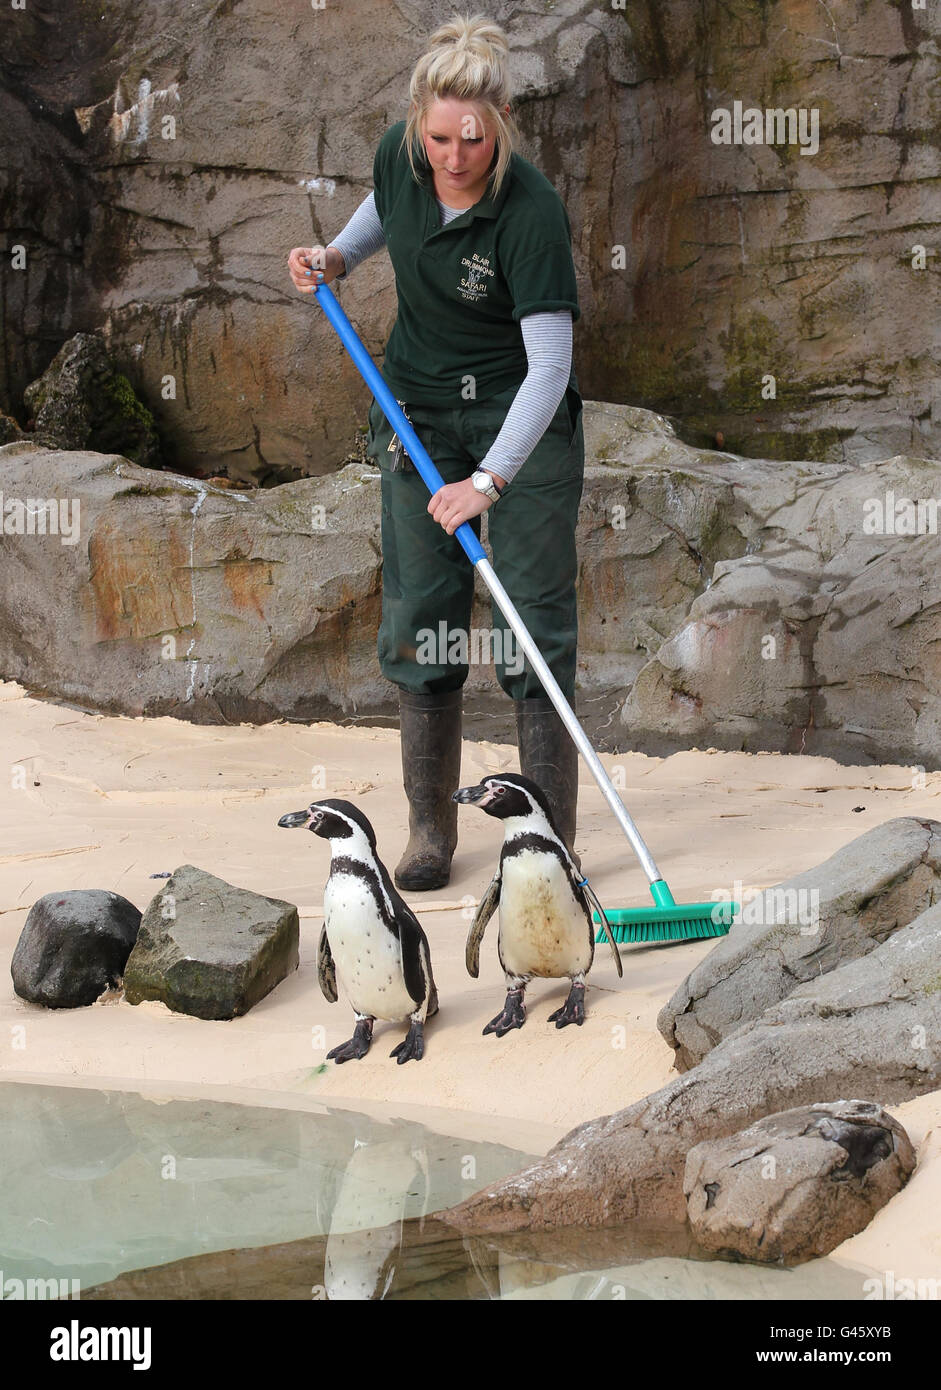 Photo. Animal keeper Kirsty McQuade sweeps the penguin enclosure at Blair Drummond Safari park in Stirling as staff make final preparations to animal enclosures before the park opens this Saturday for the 2011 season. Stock Photo